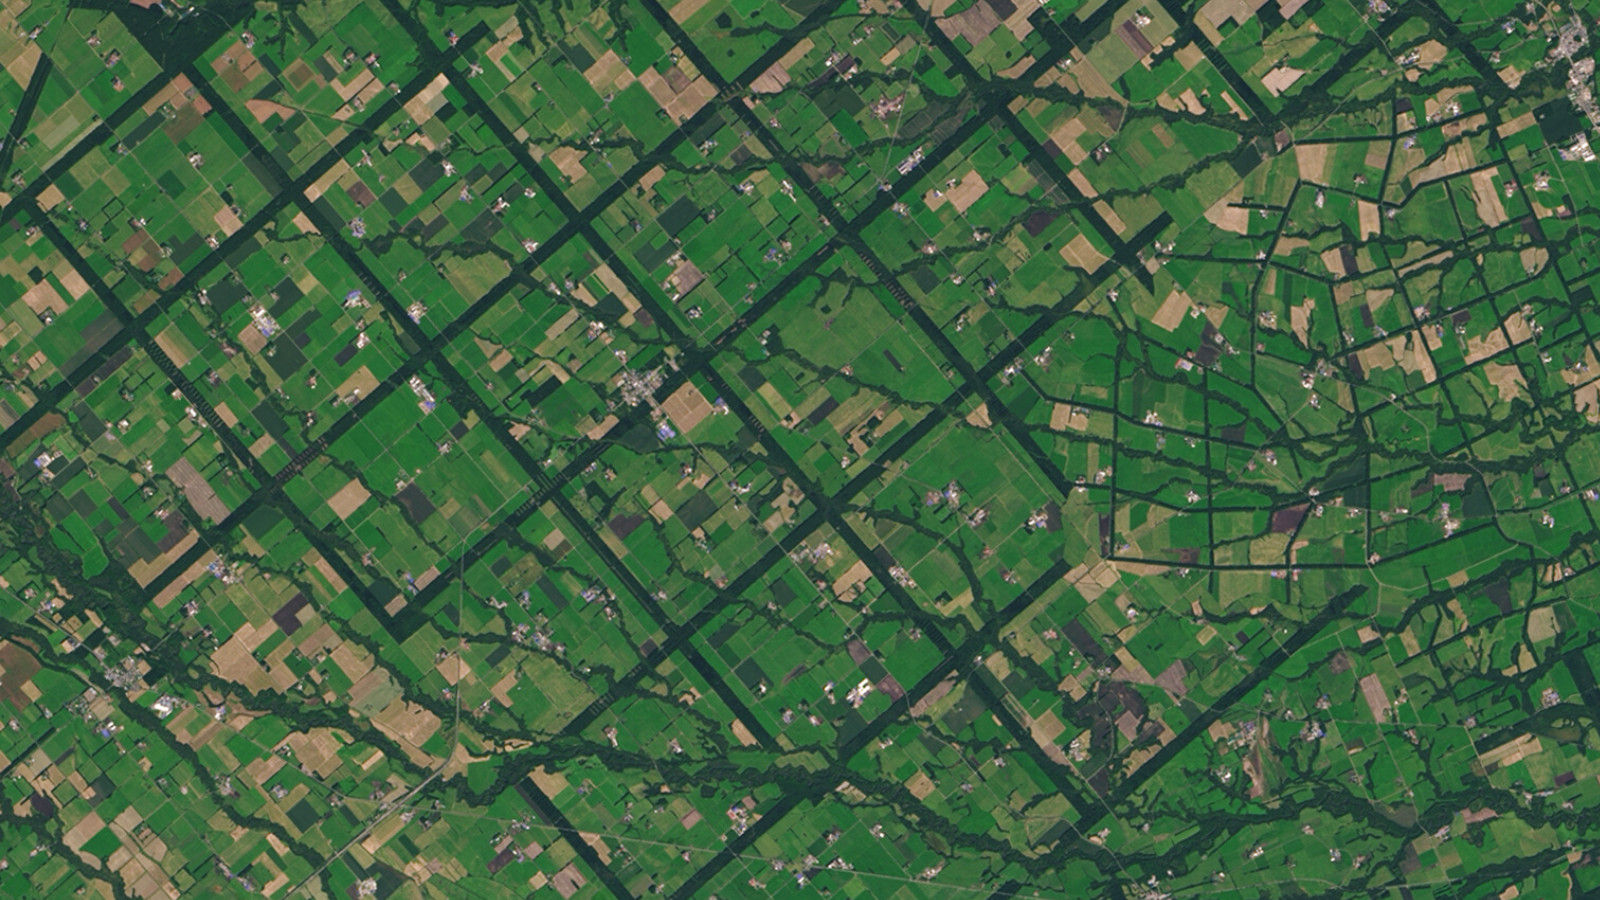 From above, the Konsen Plateau in eastern Hokkaido, Japan offers a remarkable sight: a massive grid that spreads across the rural landscape like a checkerboard. The strips are forested windbreaks—180-meter (590-foot) wide rows of coniferous trees that help shelter grasslands and animals from harsh weather. Image Credit: Operational Land Imager on Landsat 8.